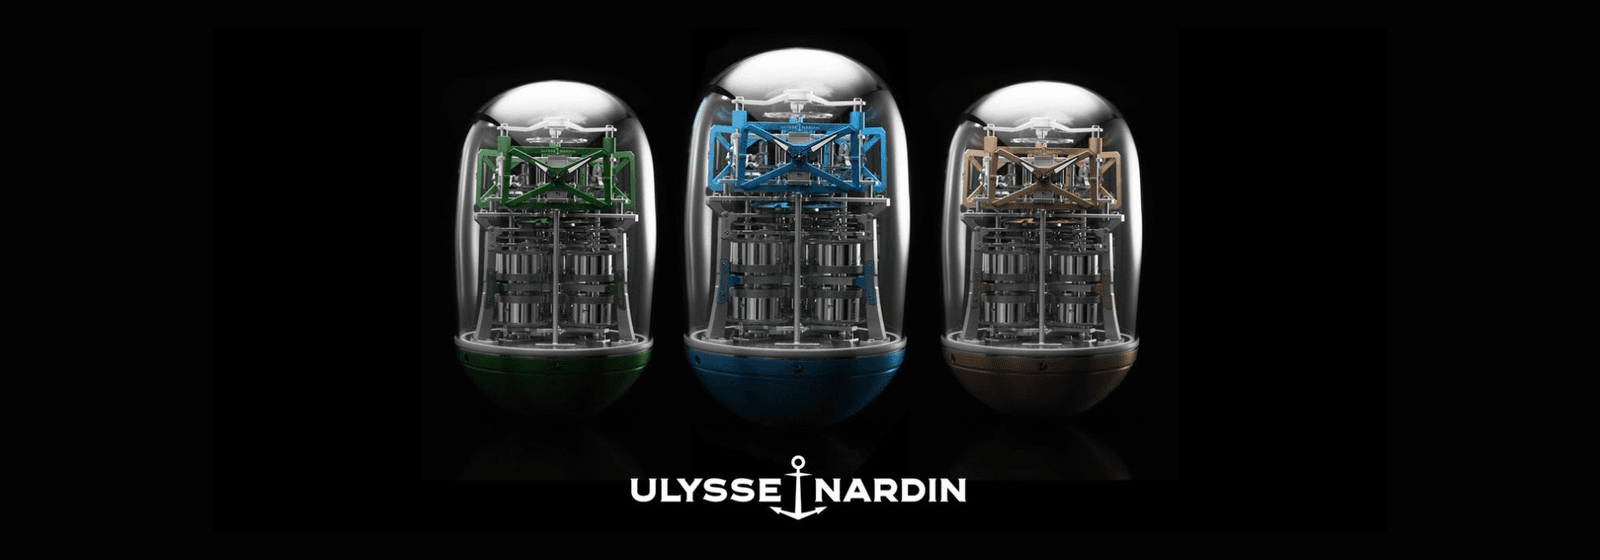 Reimaging A Table Clock Or Chronometer? Ulysse Nardin’s Final UFO Editions